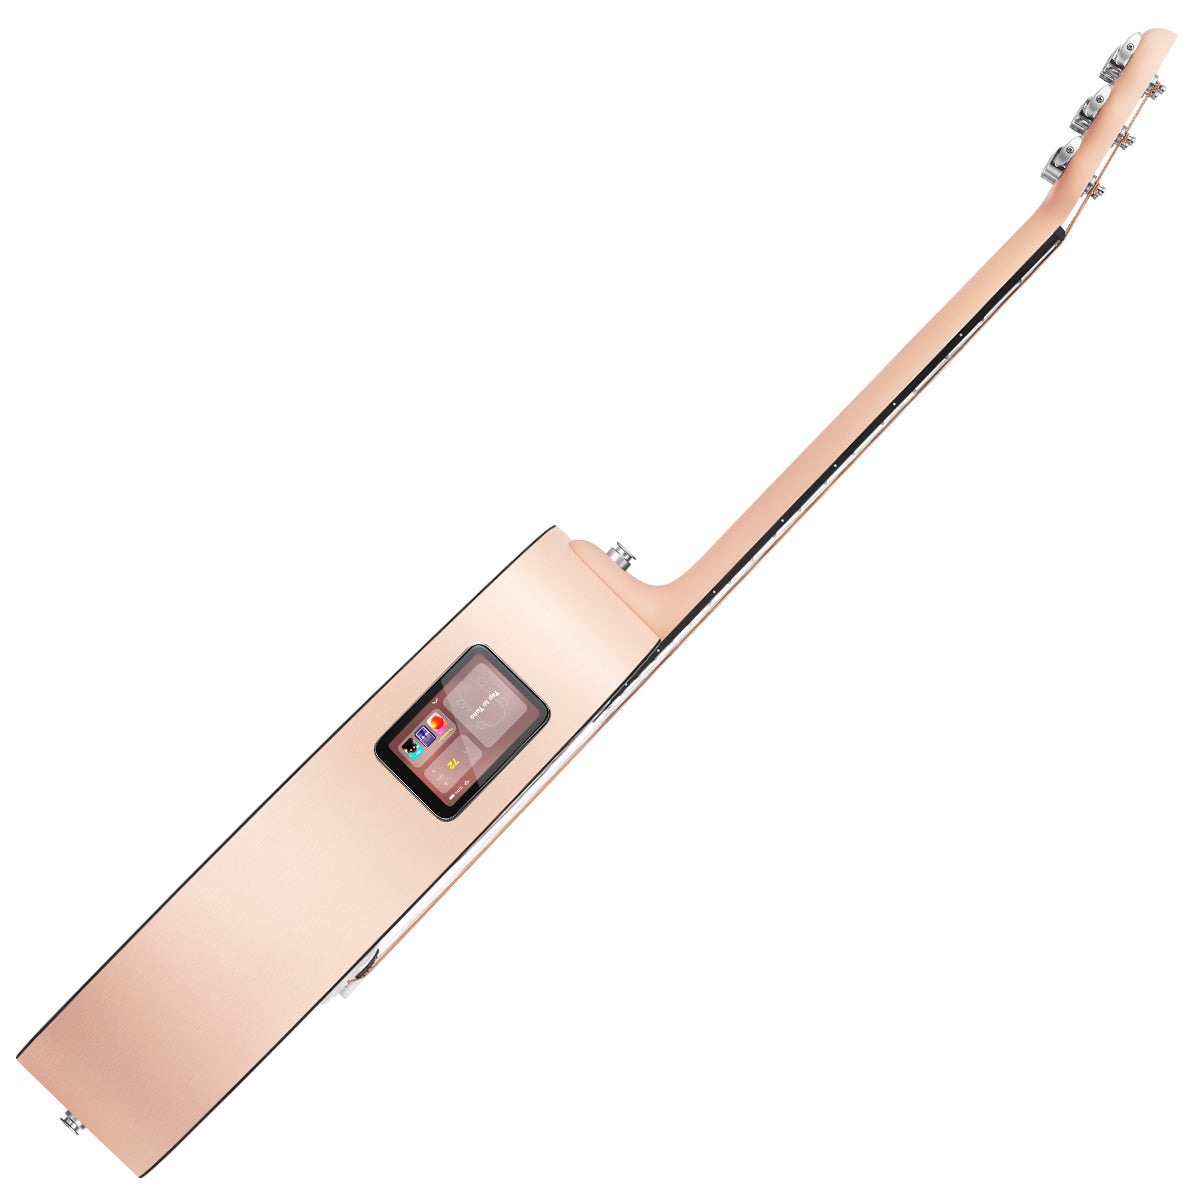 LAVA ME PLAY 36" with Lite Bag ~ Light Peach/Frost White, Acoustic Guitar for sale at Richards Guitars.